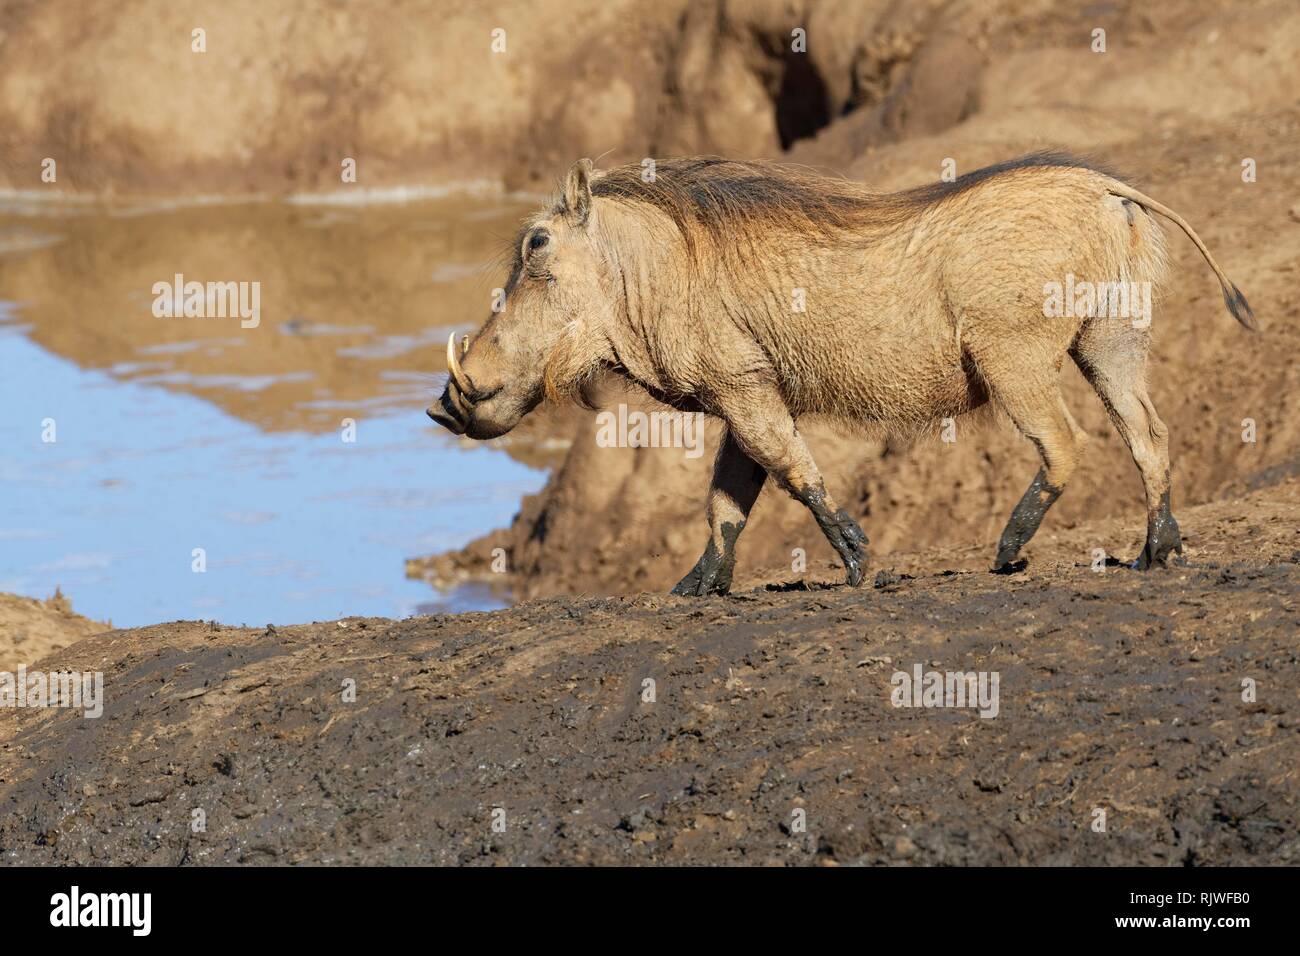 Common warthog (Phacochoerus africanus), adult, walking at a waterhole, Addo Elephant National Park, Eastern Cape, South Africa Stock Photo